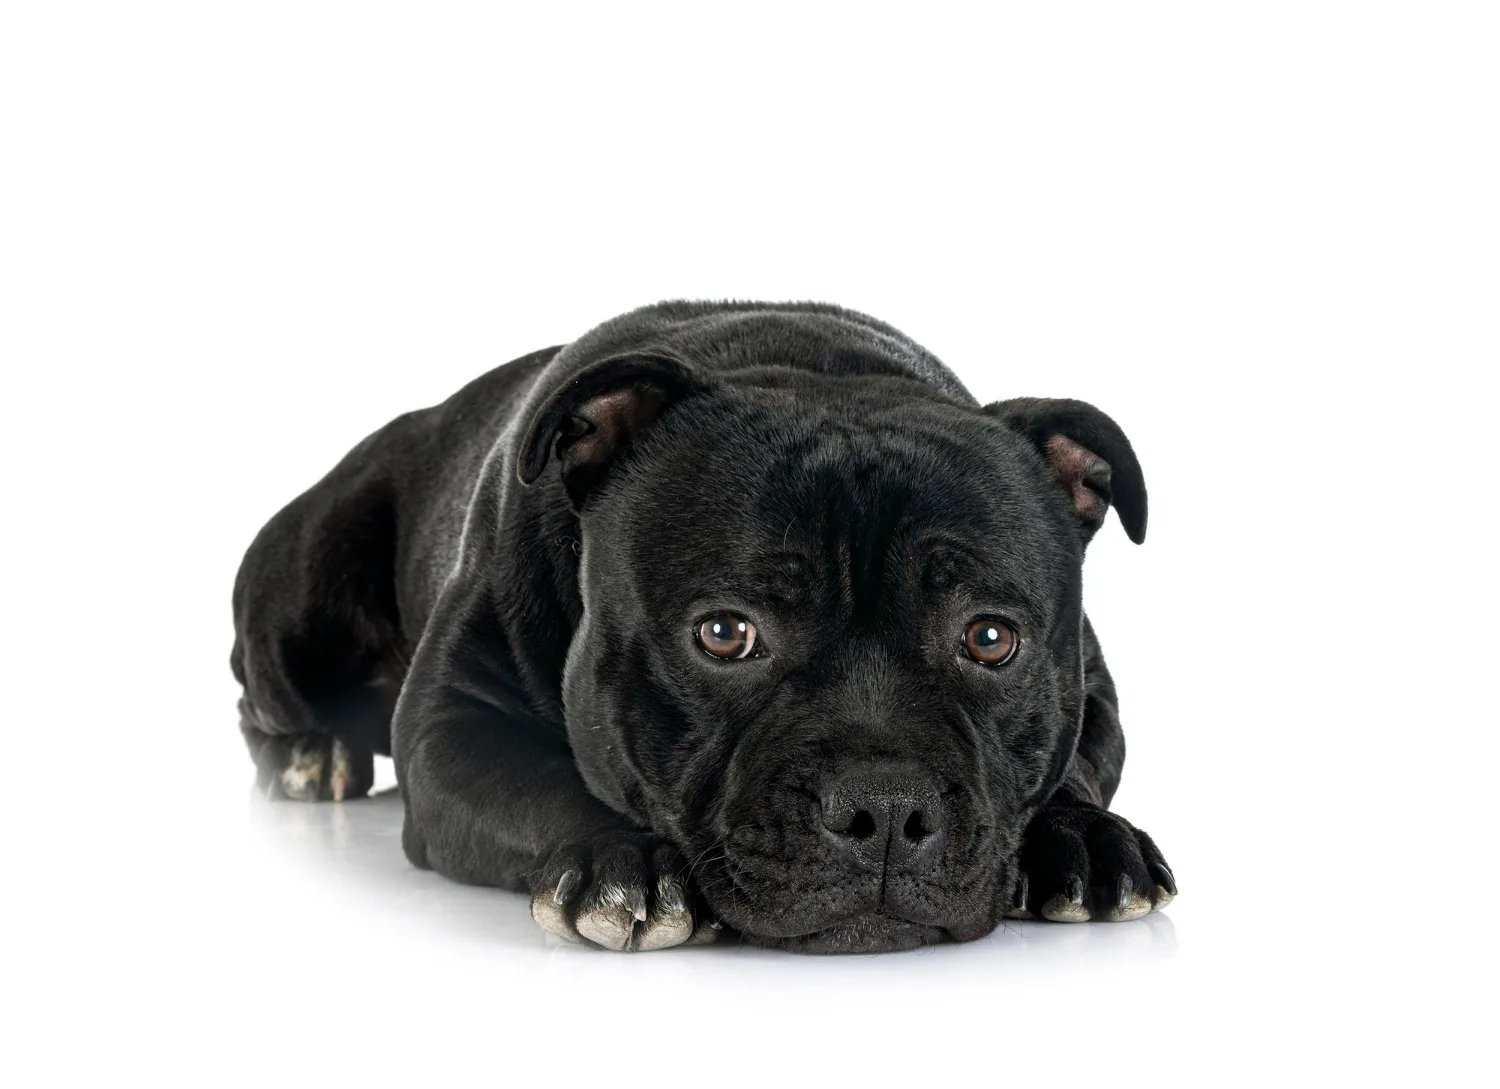 What are different breeds of pitbull terriers?